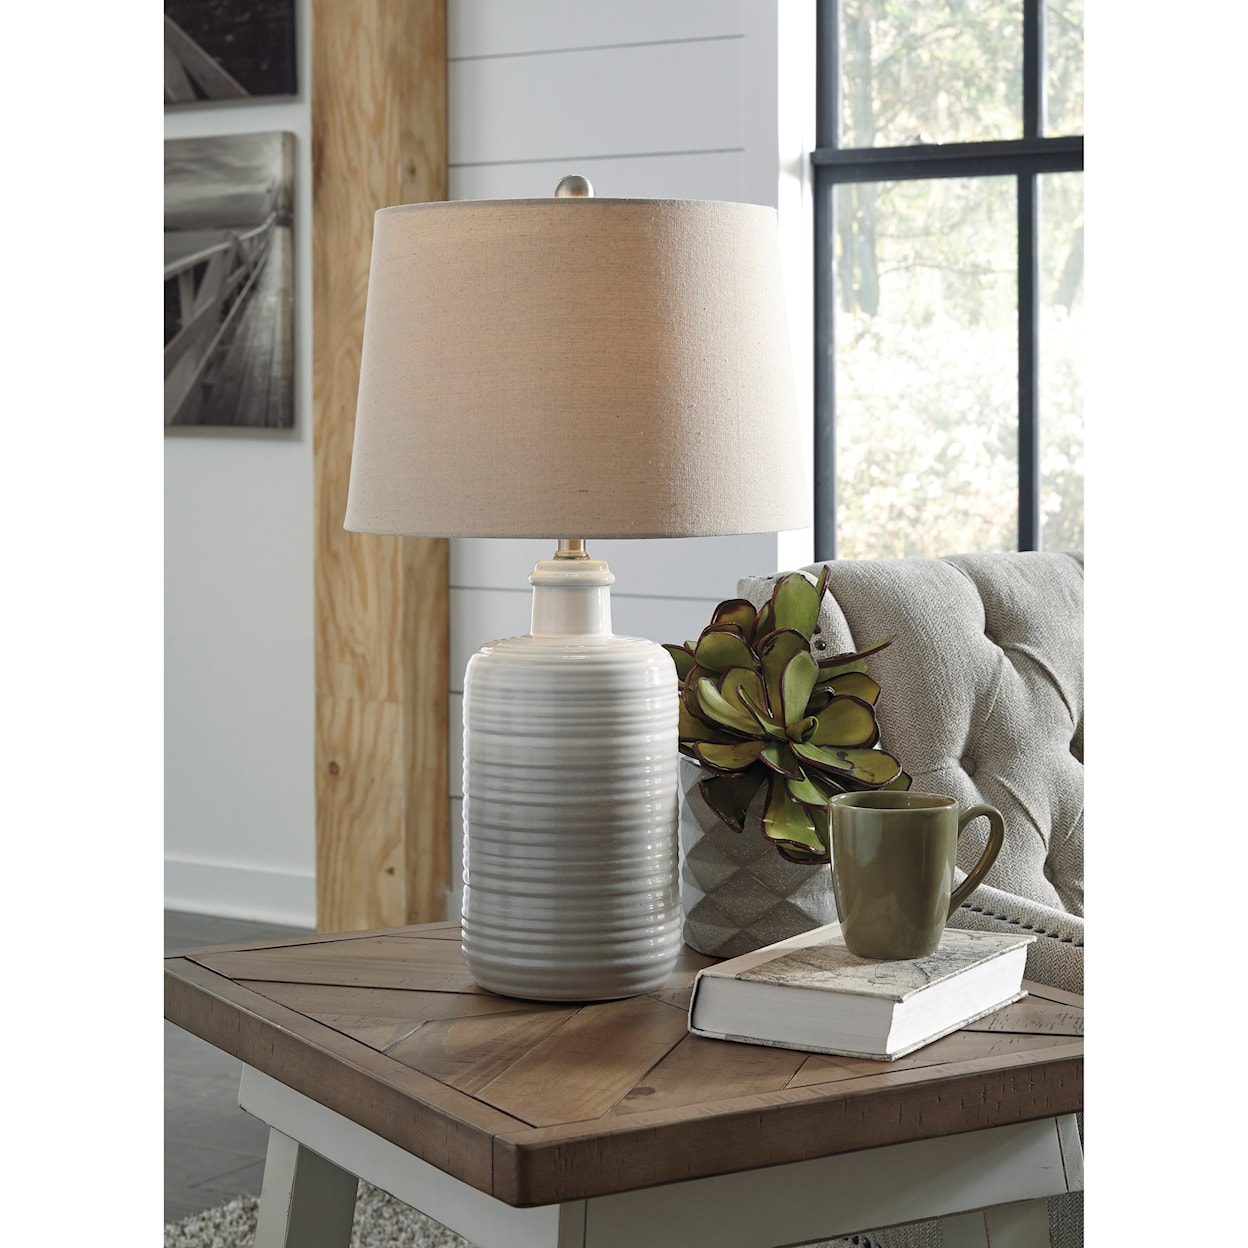 Benchcraft Lamps - Casual Set of 2 Marnina Taupe Ceramic Table Lamps